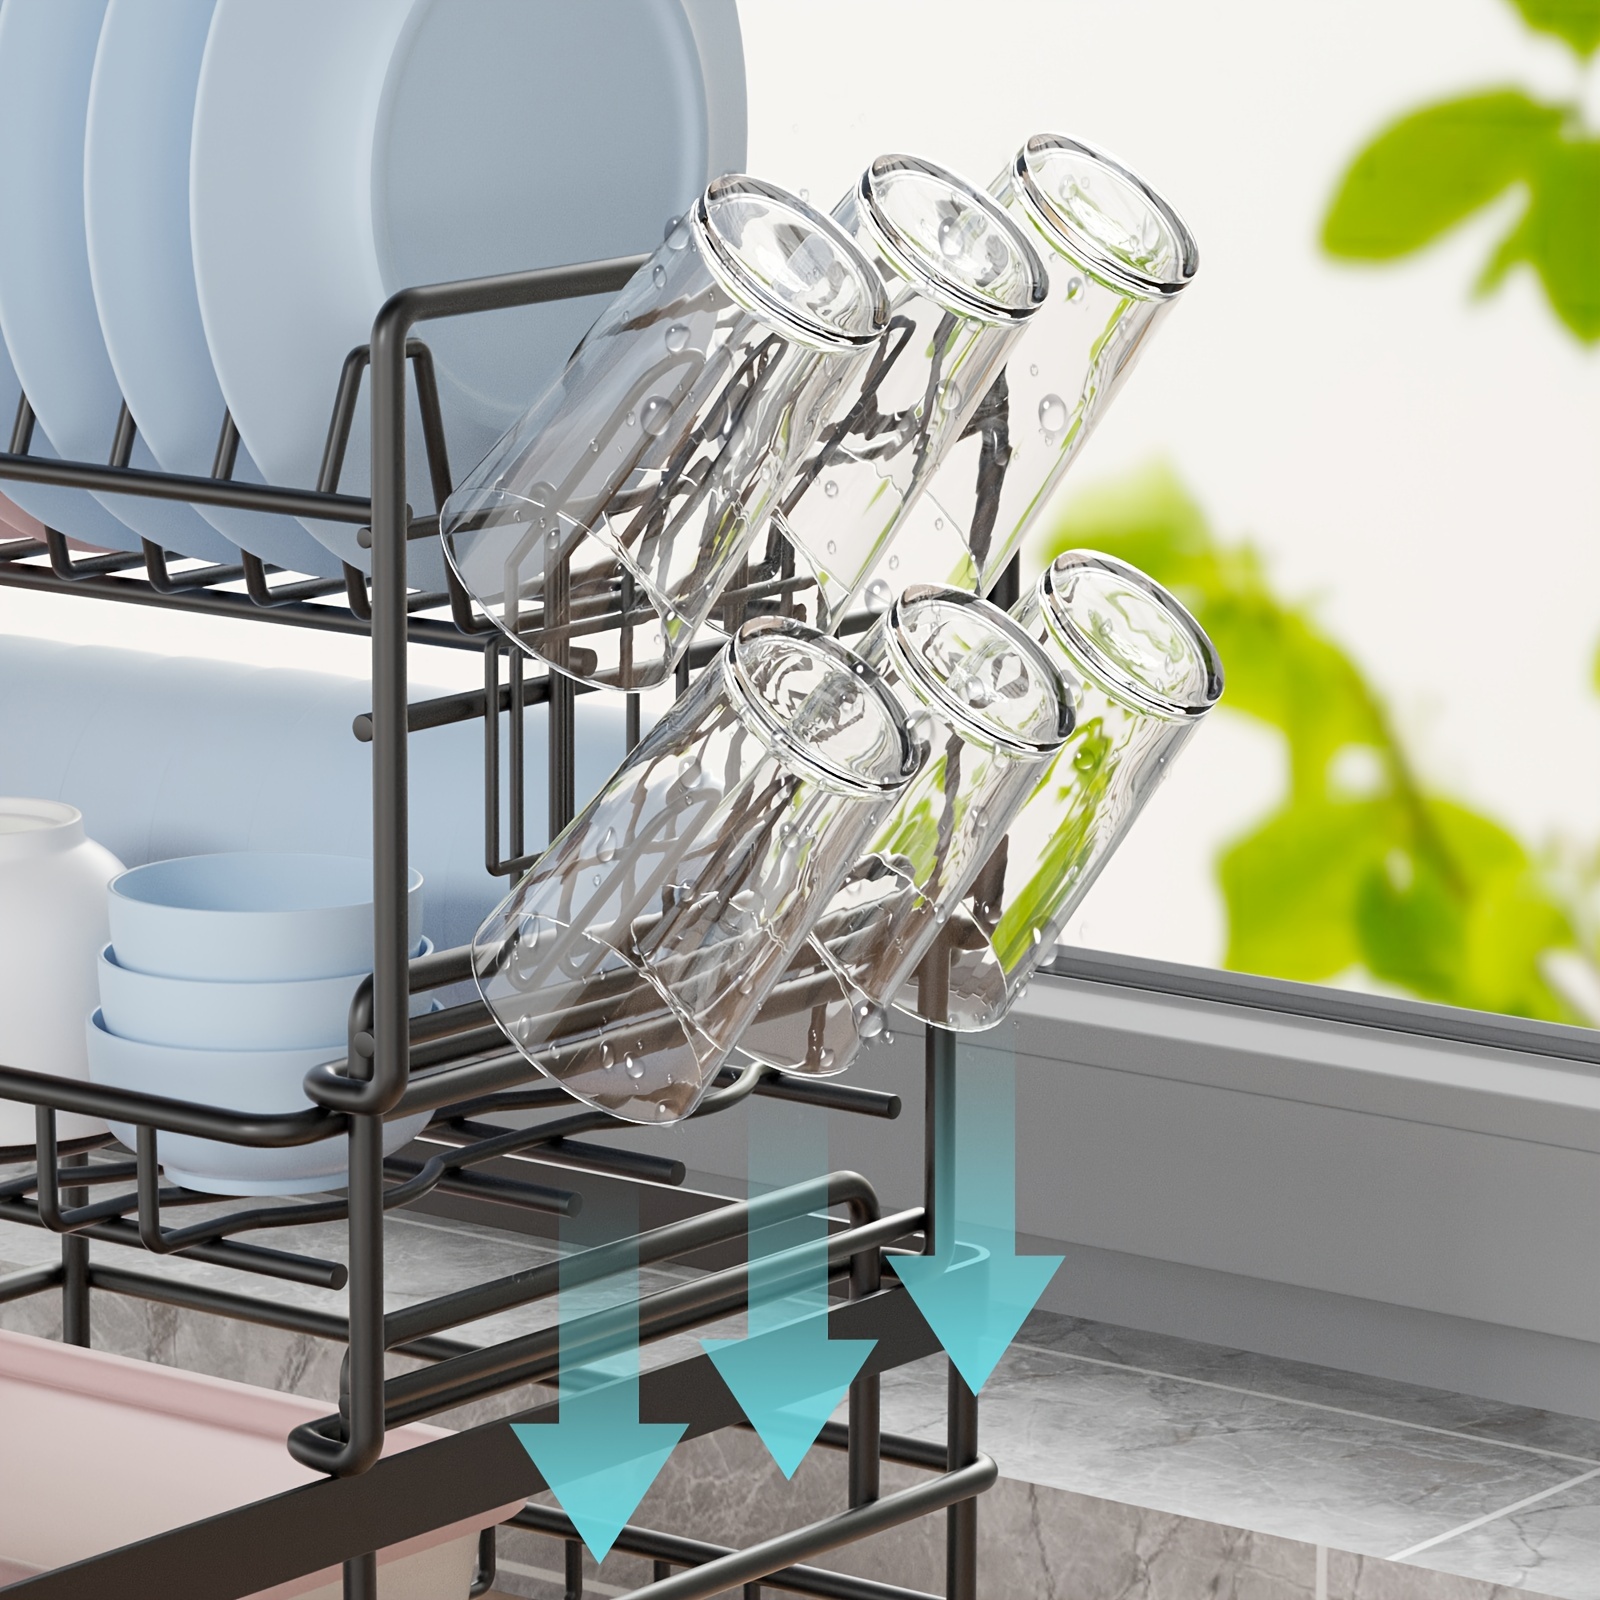 New 3 Tier Dish Drainer Drying Dish Rack Stainless Steel Kitchen